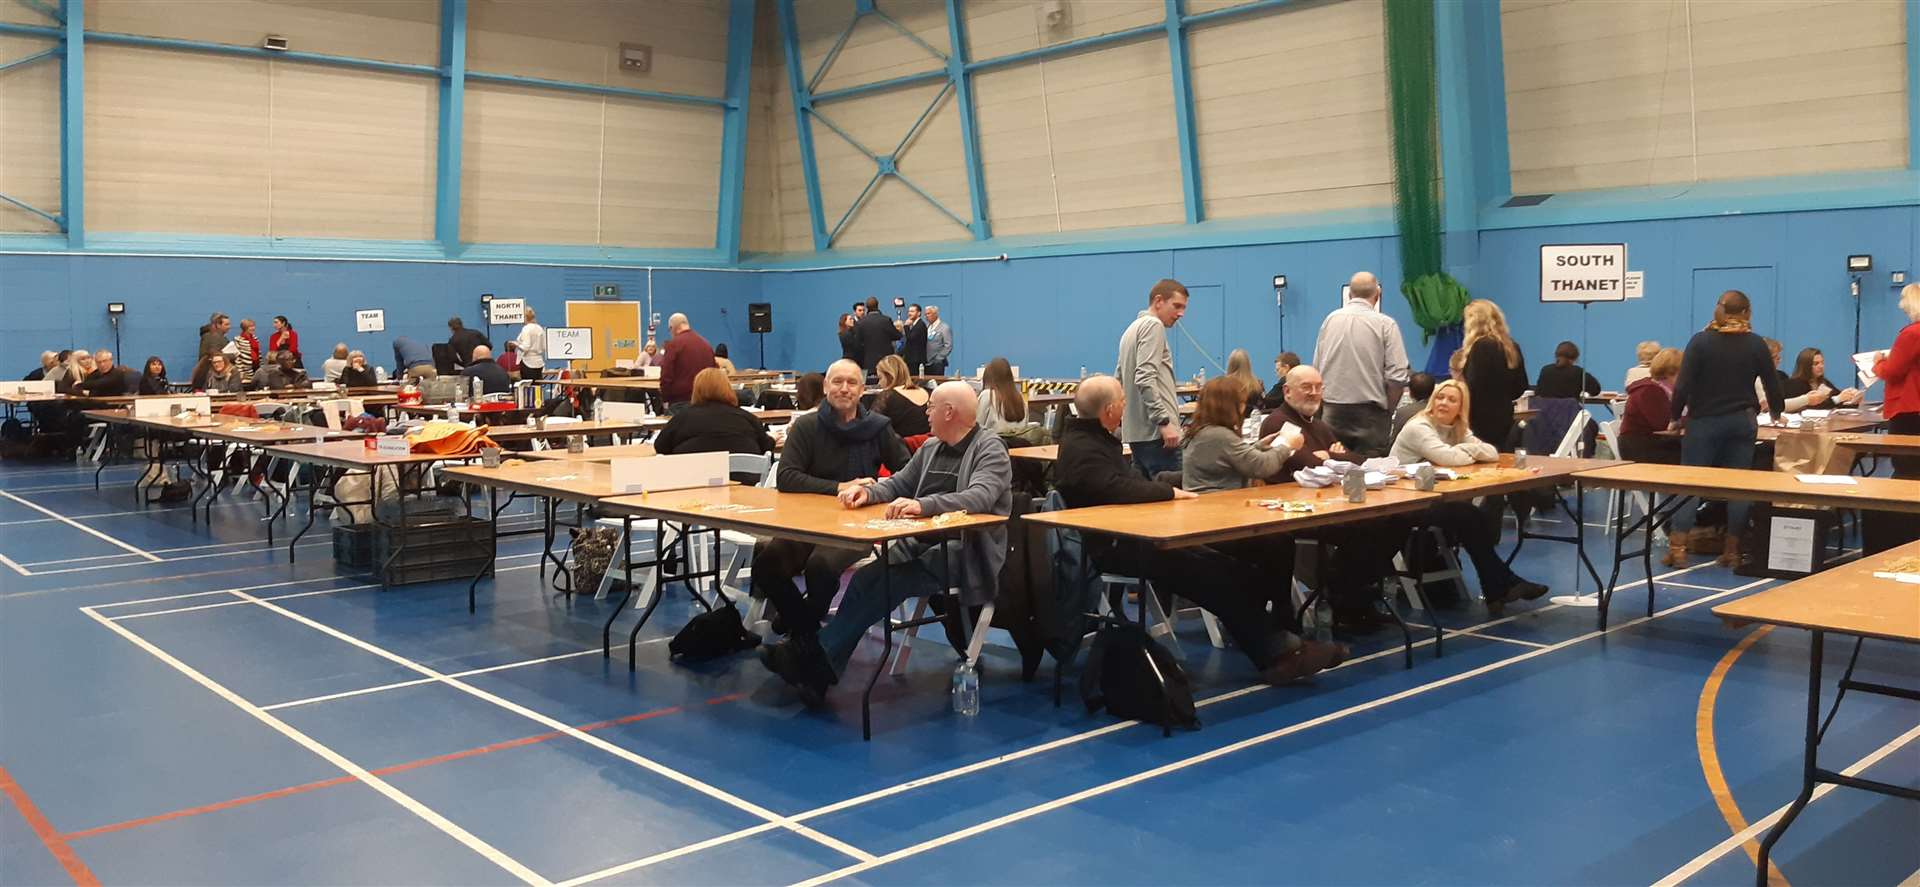 Much of the room has cleared after a number of the counters finished going through their ballot boxes (24132878)